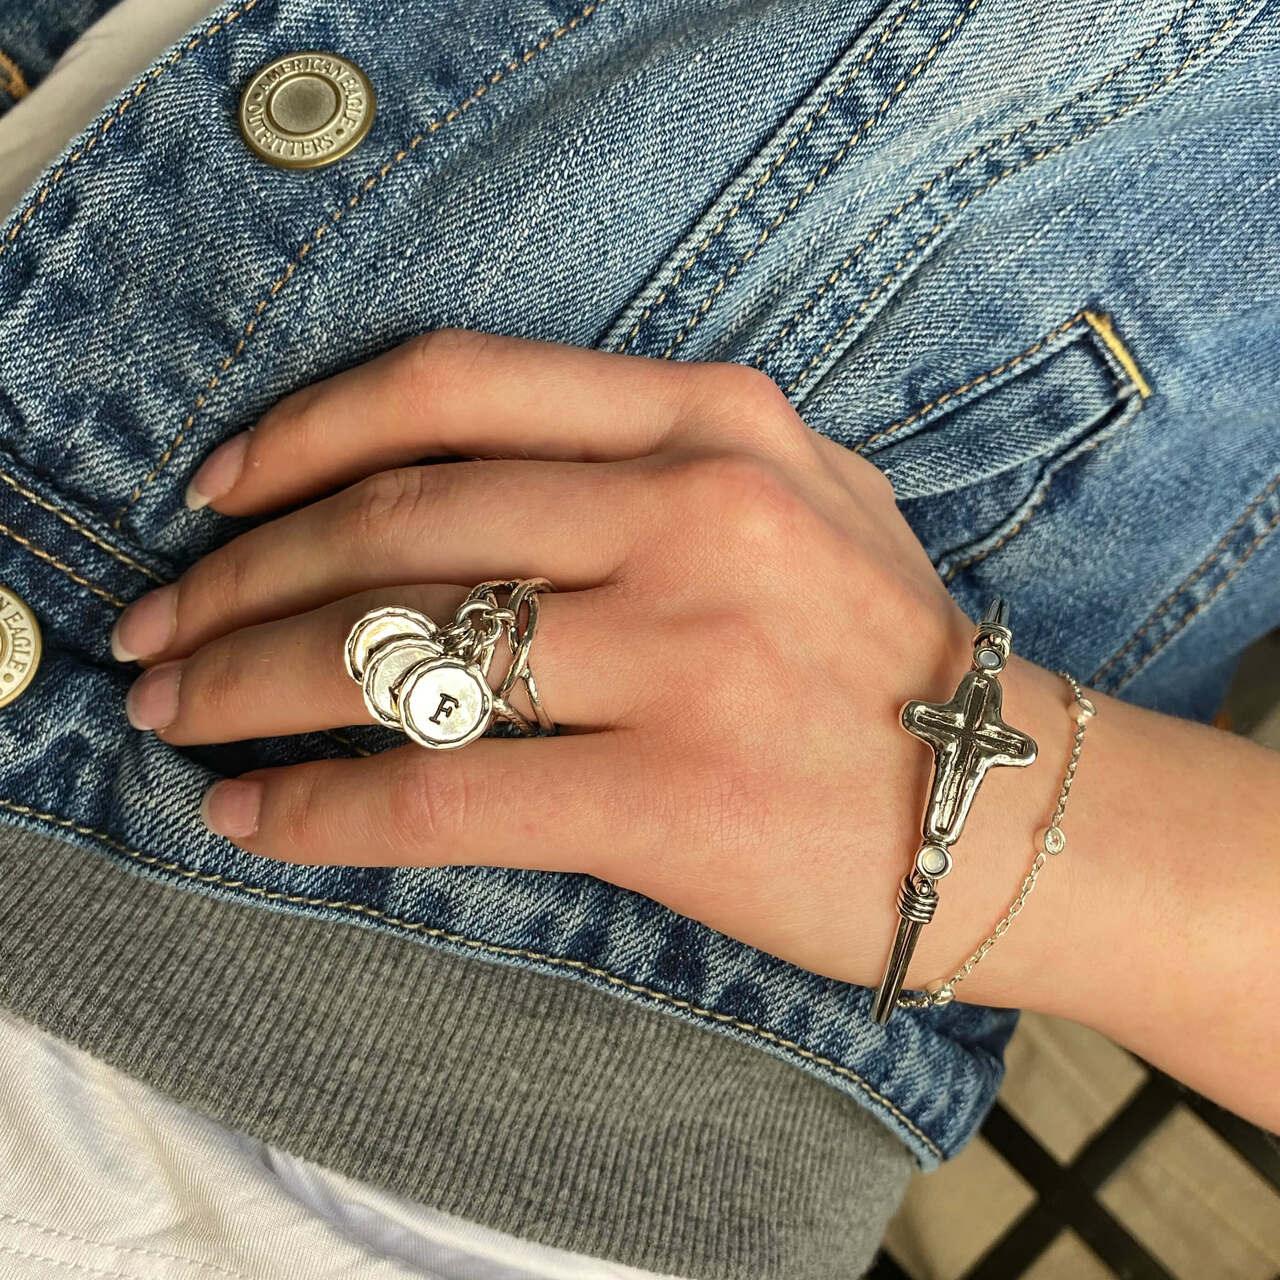 My Shines Ring paired with Redeemed Bracelet and Starlight Bracelet